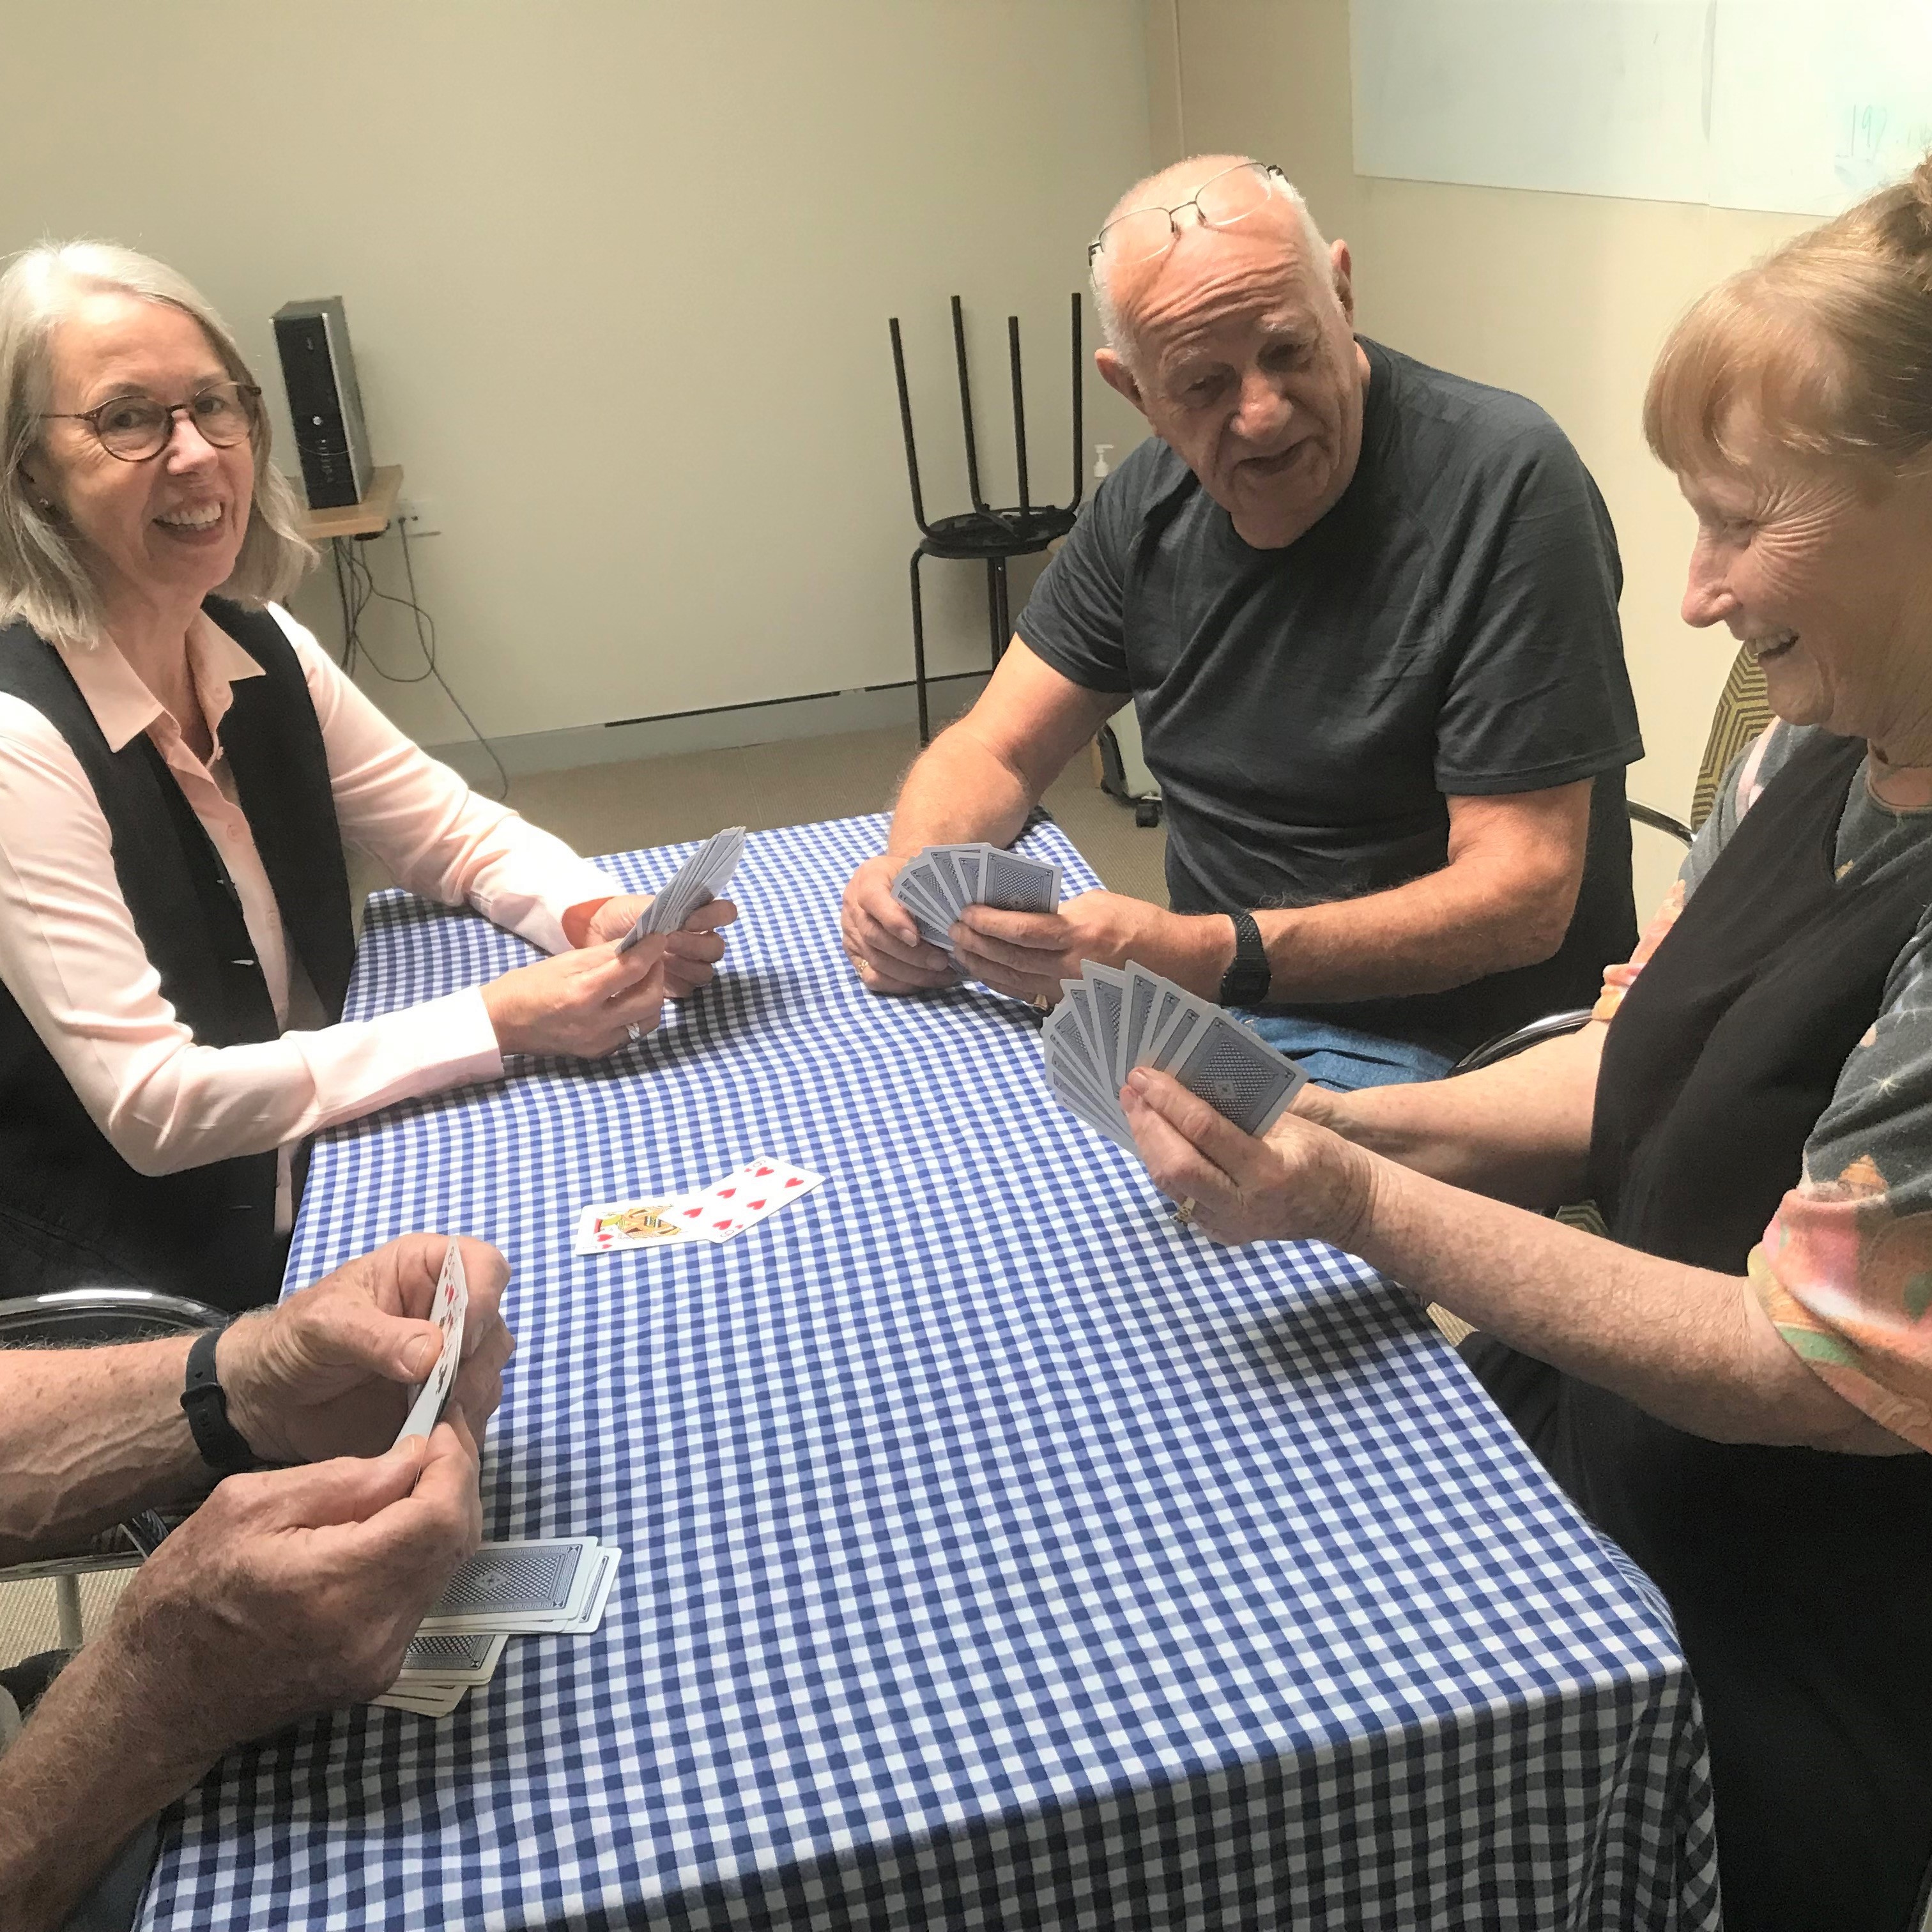 People playing cards around a table